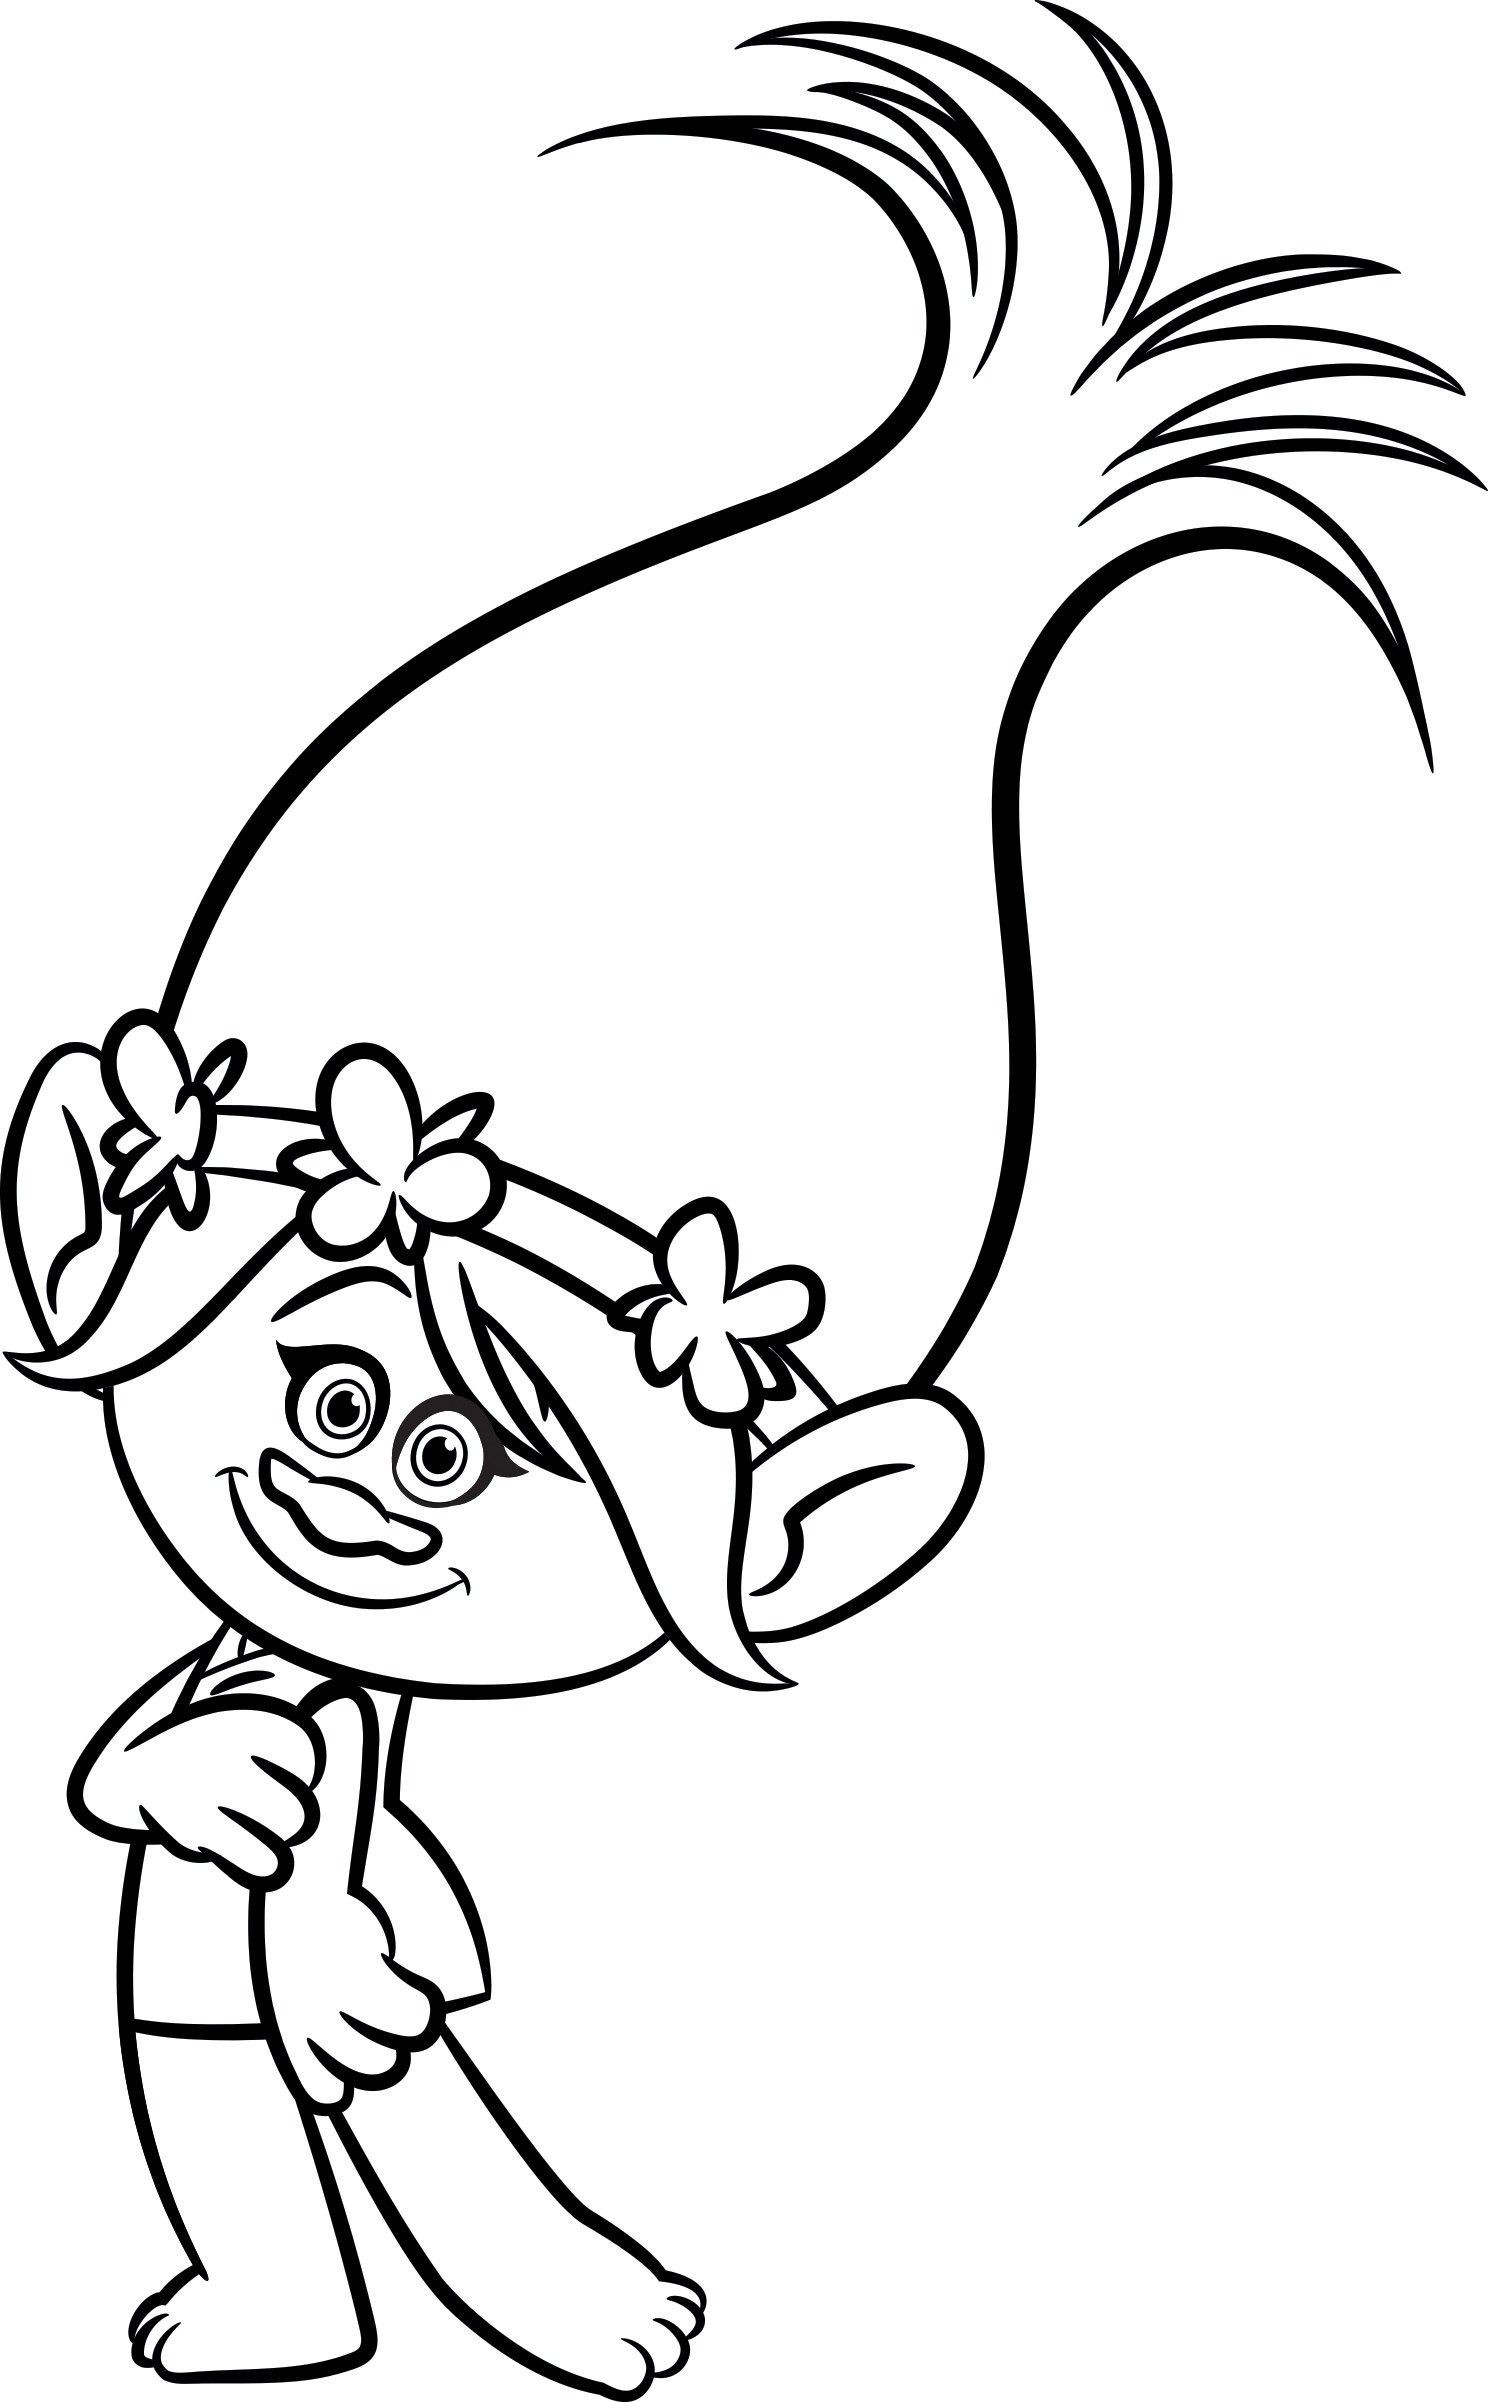 Trolls Coloring Pages Poppy Wallpaper